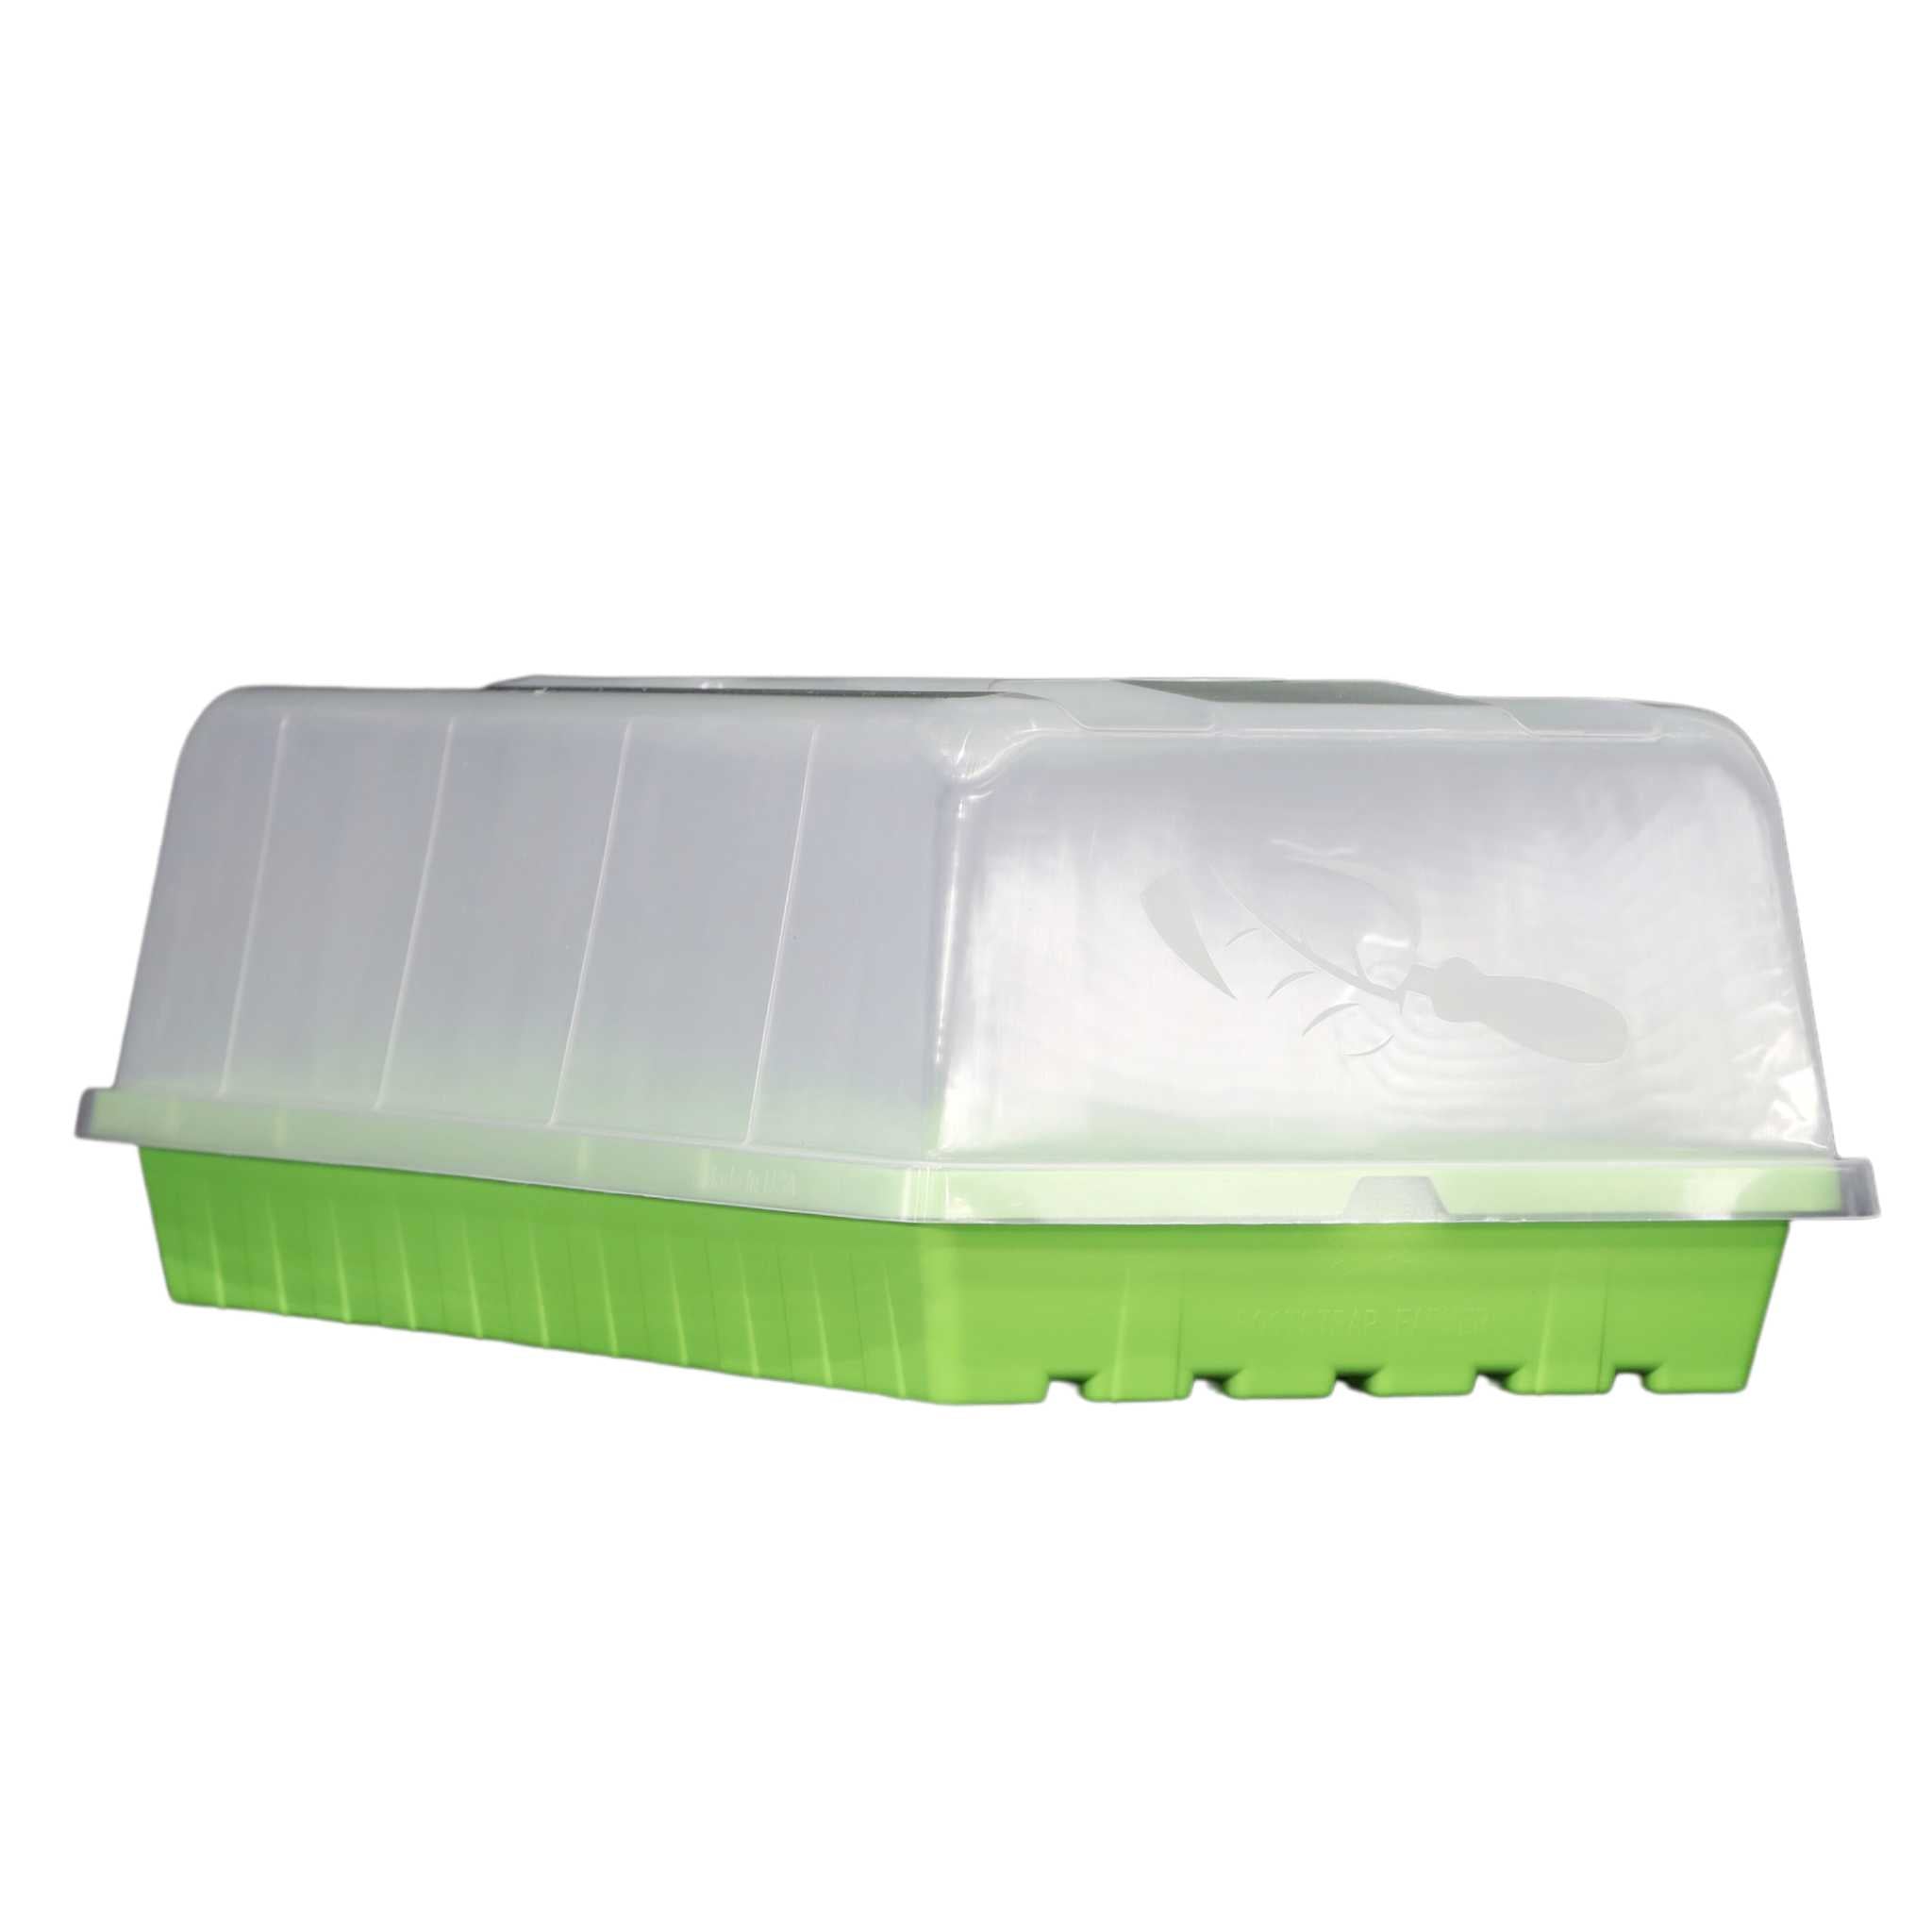 The Container Store 21-Cube White Ice Tray with Lid - Each